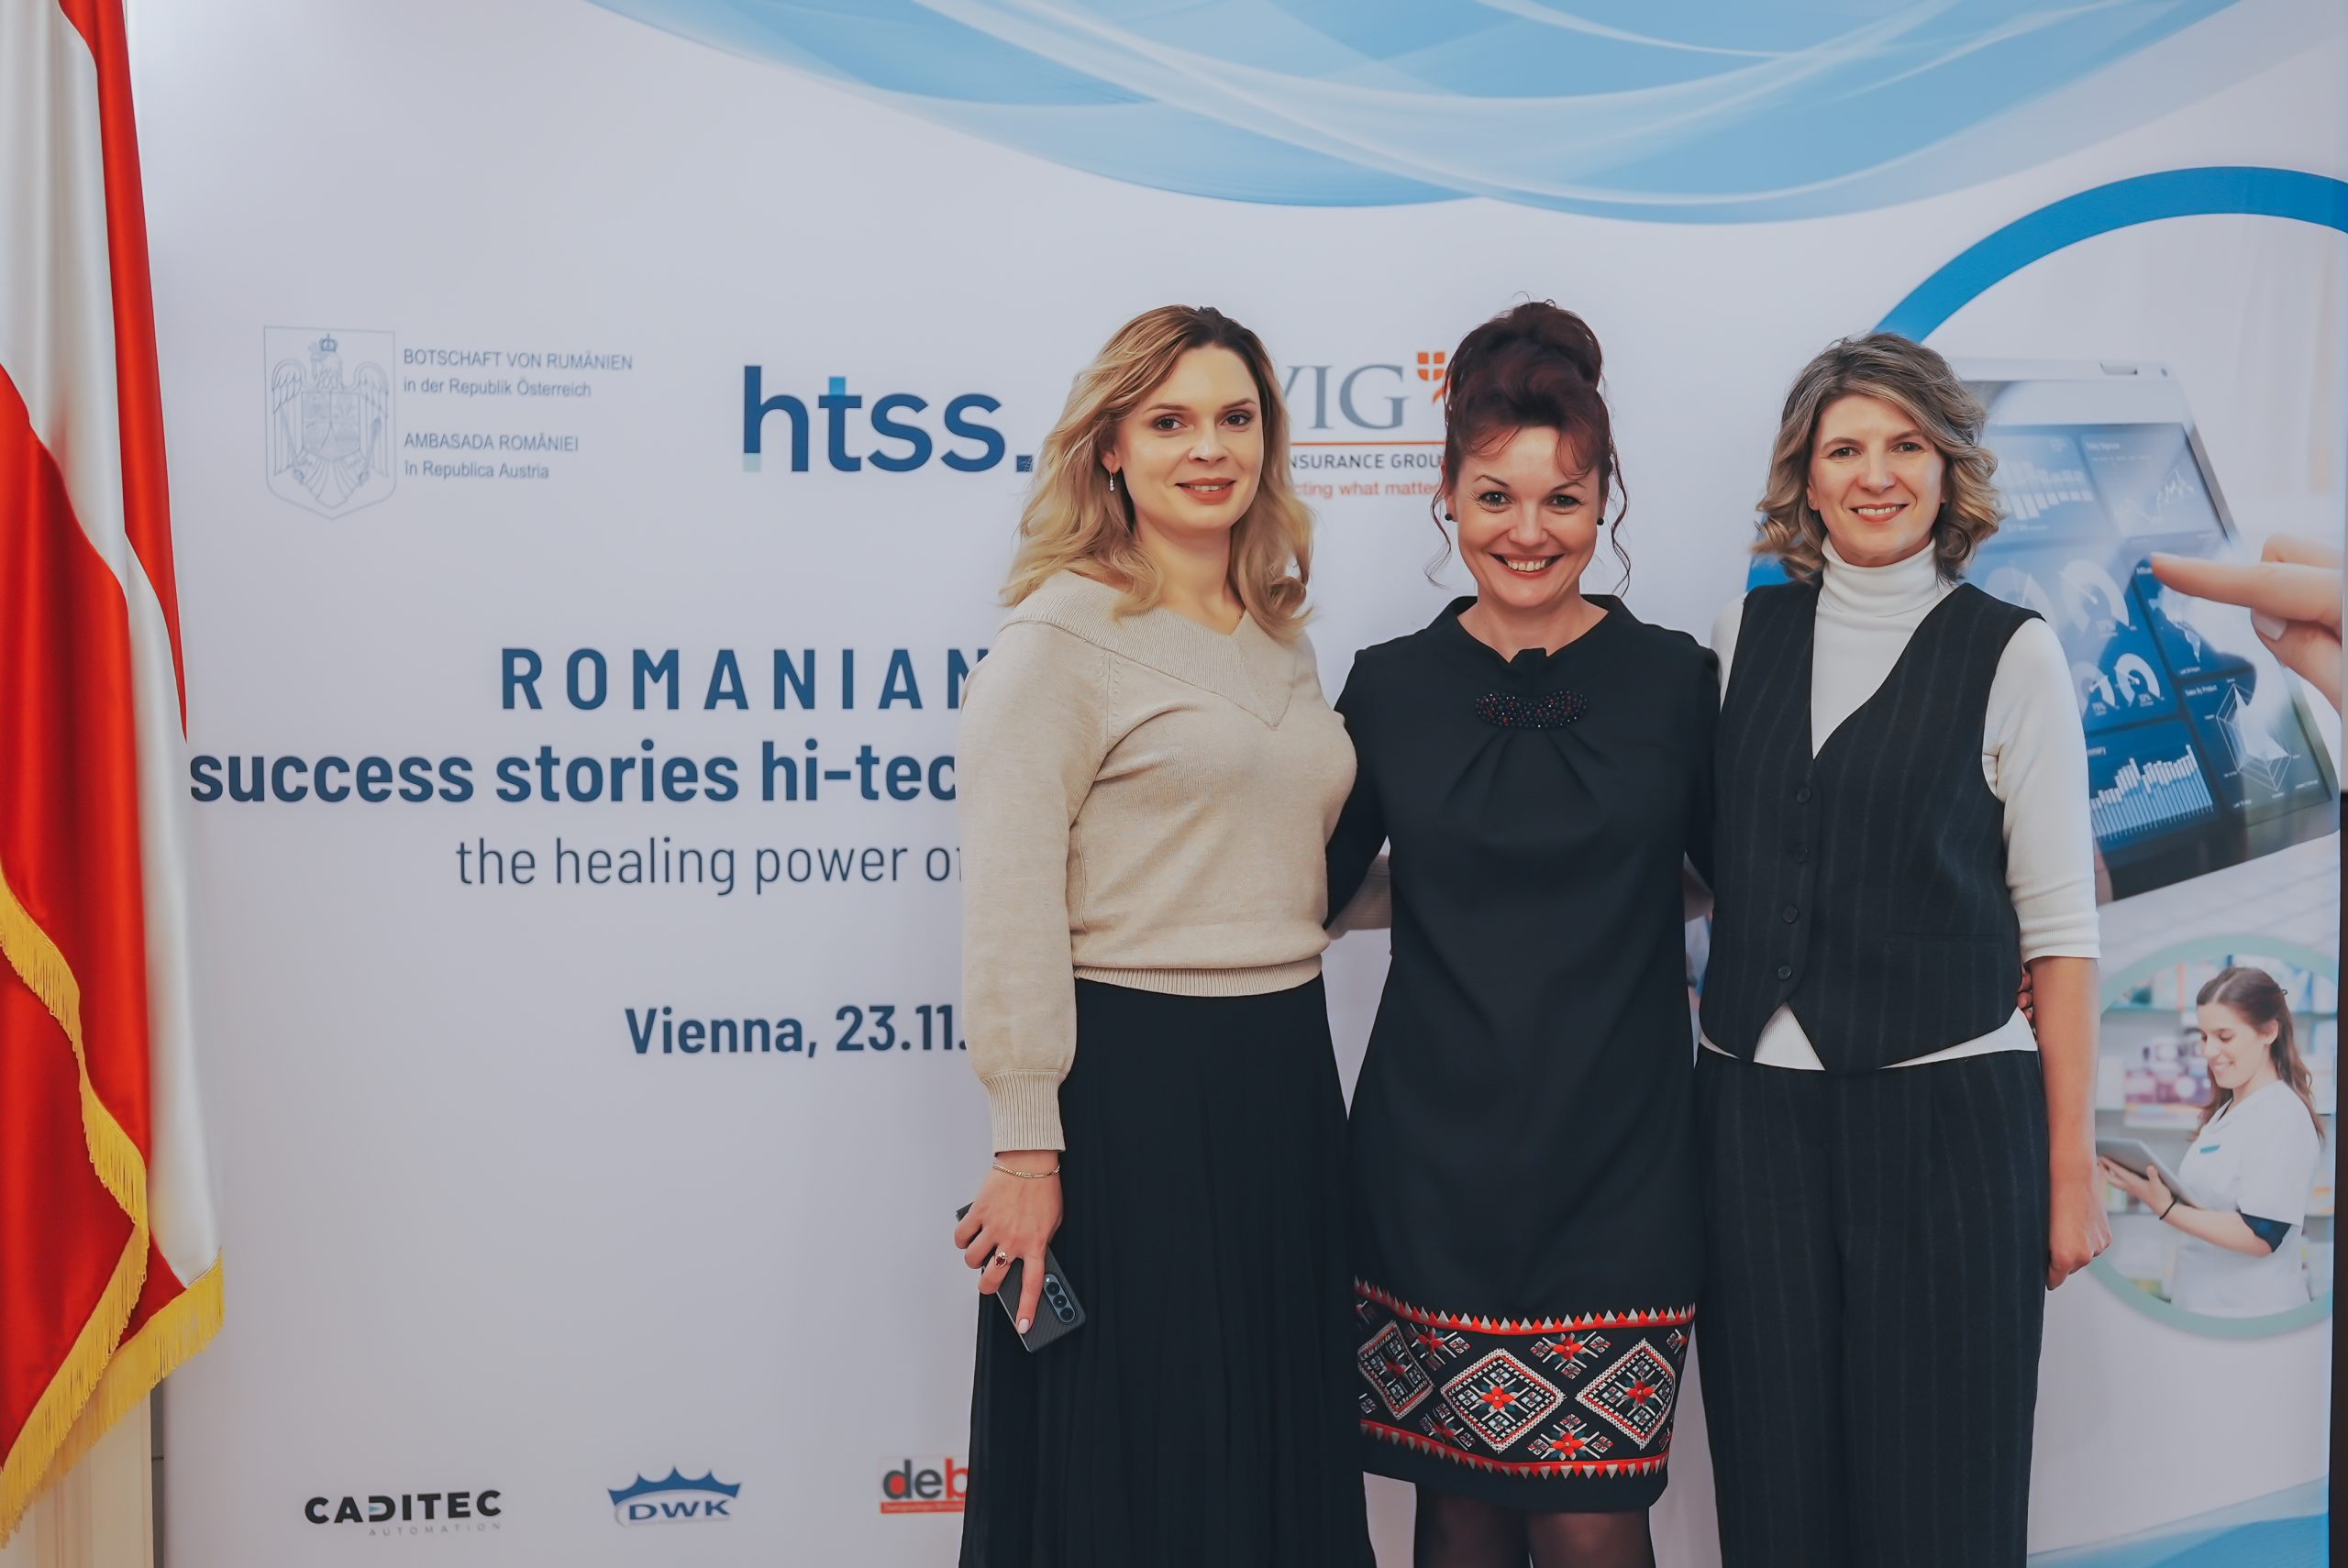 Charting Today and Tomorrow at Romanian Day: The Innovation Journey of htss at the Embassy of Romania in Vienna